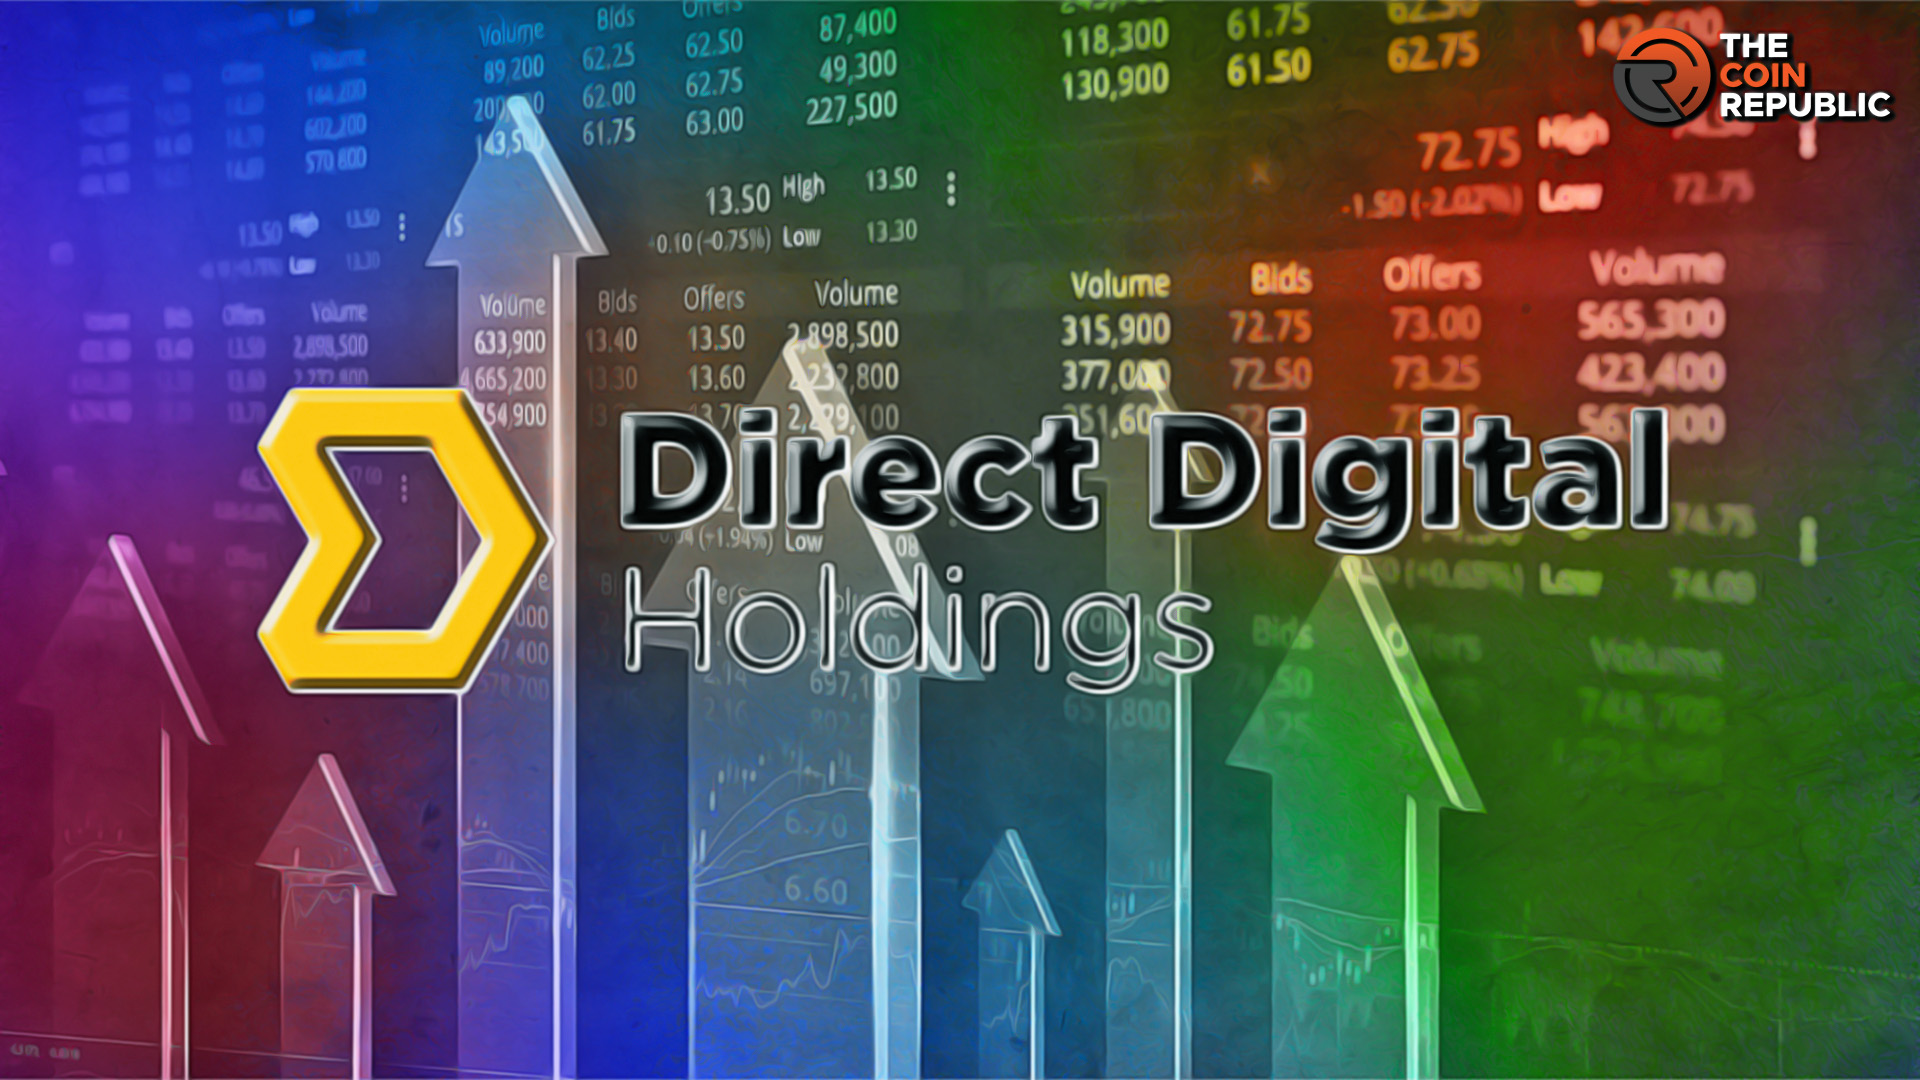 DRCT Stock Price: Earnings Report Spikes Up Shares To 55%